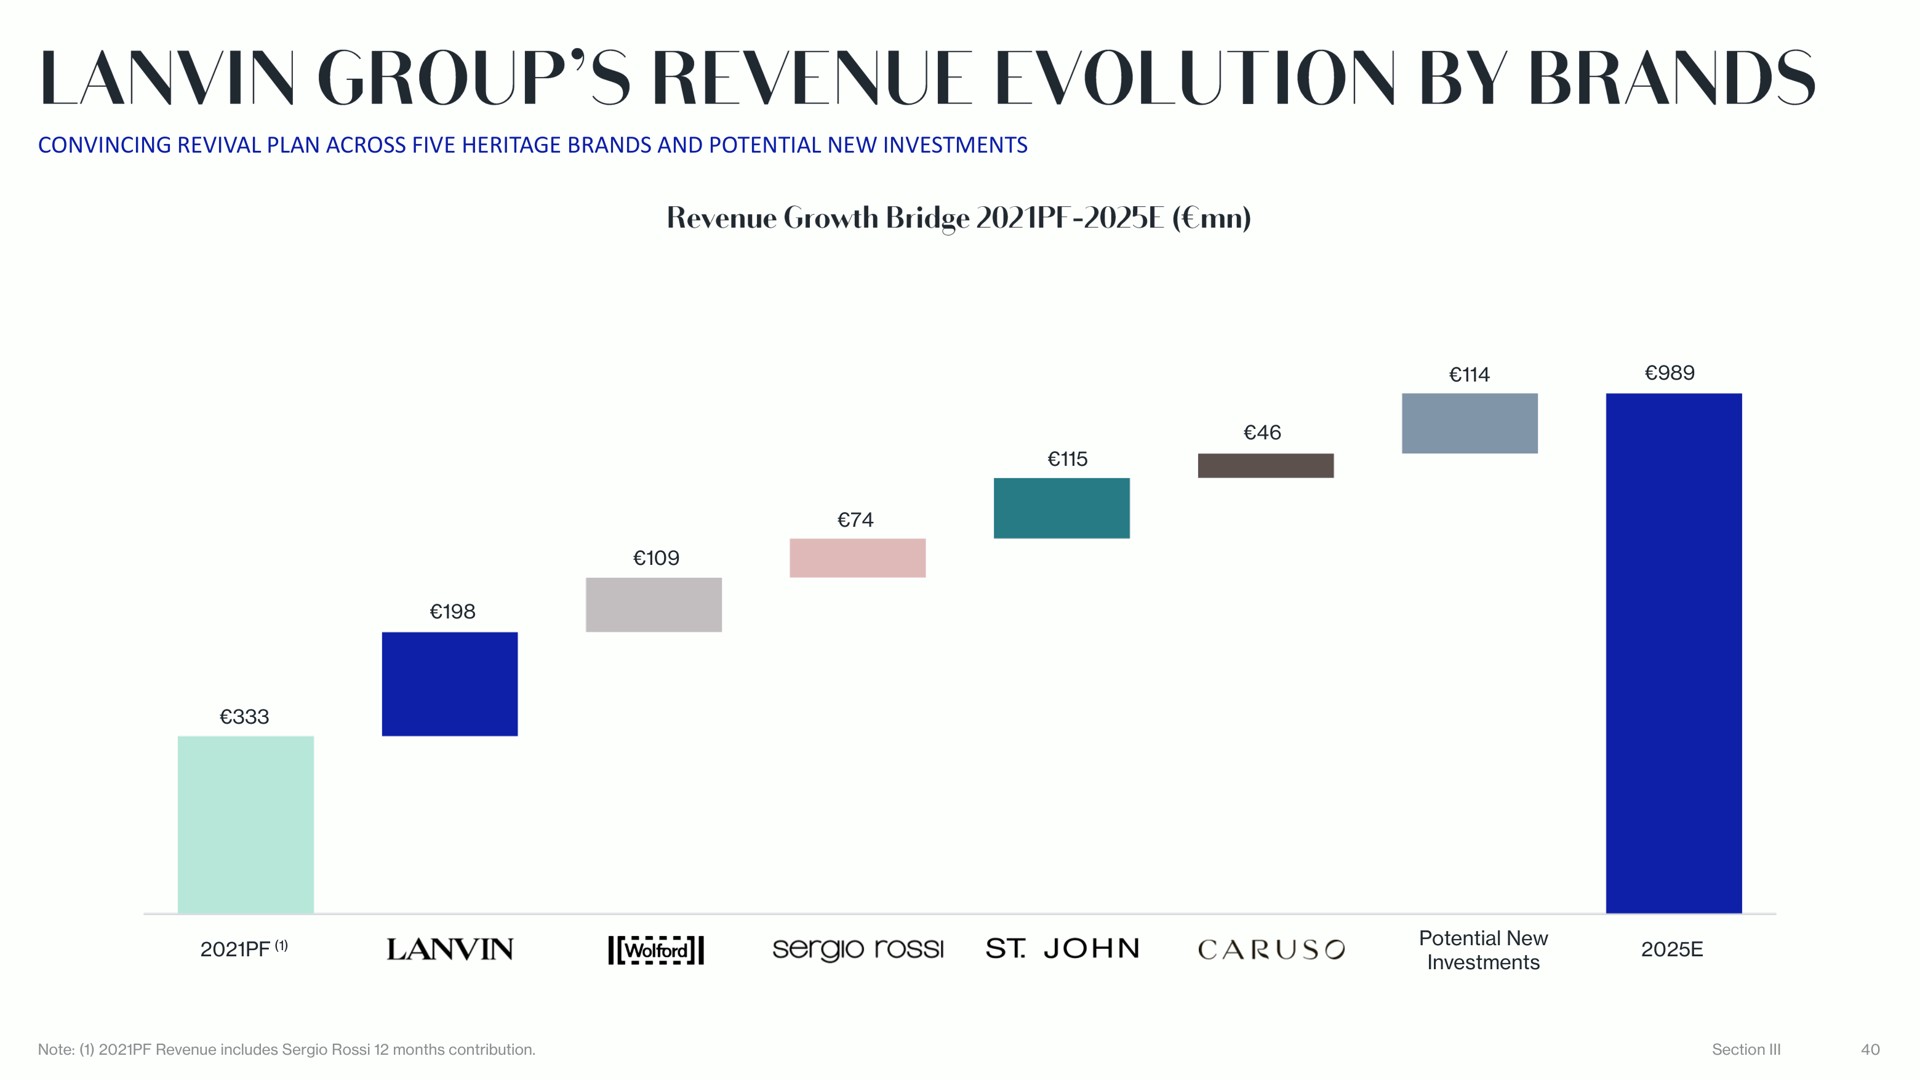 convincing revival plan across five heritage brands and potential new investments group revenue evolution by | Lanvin